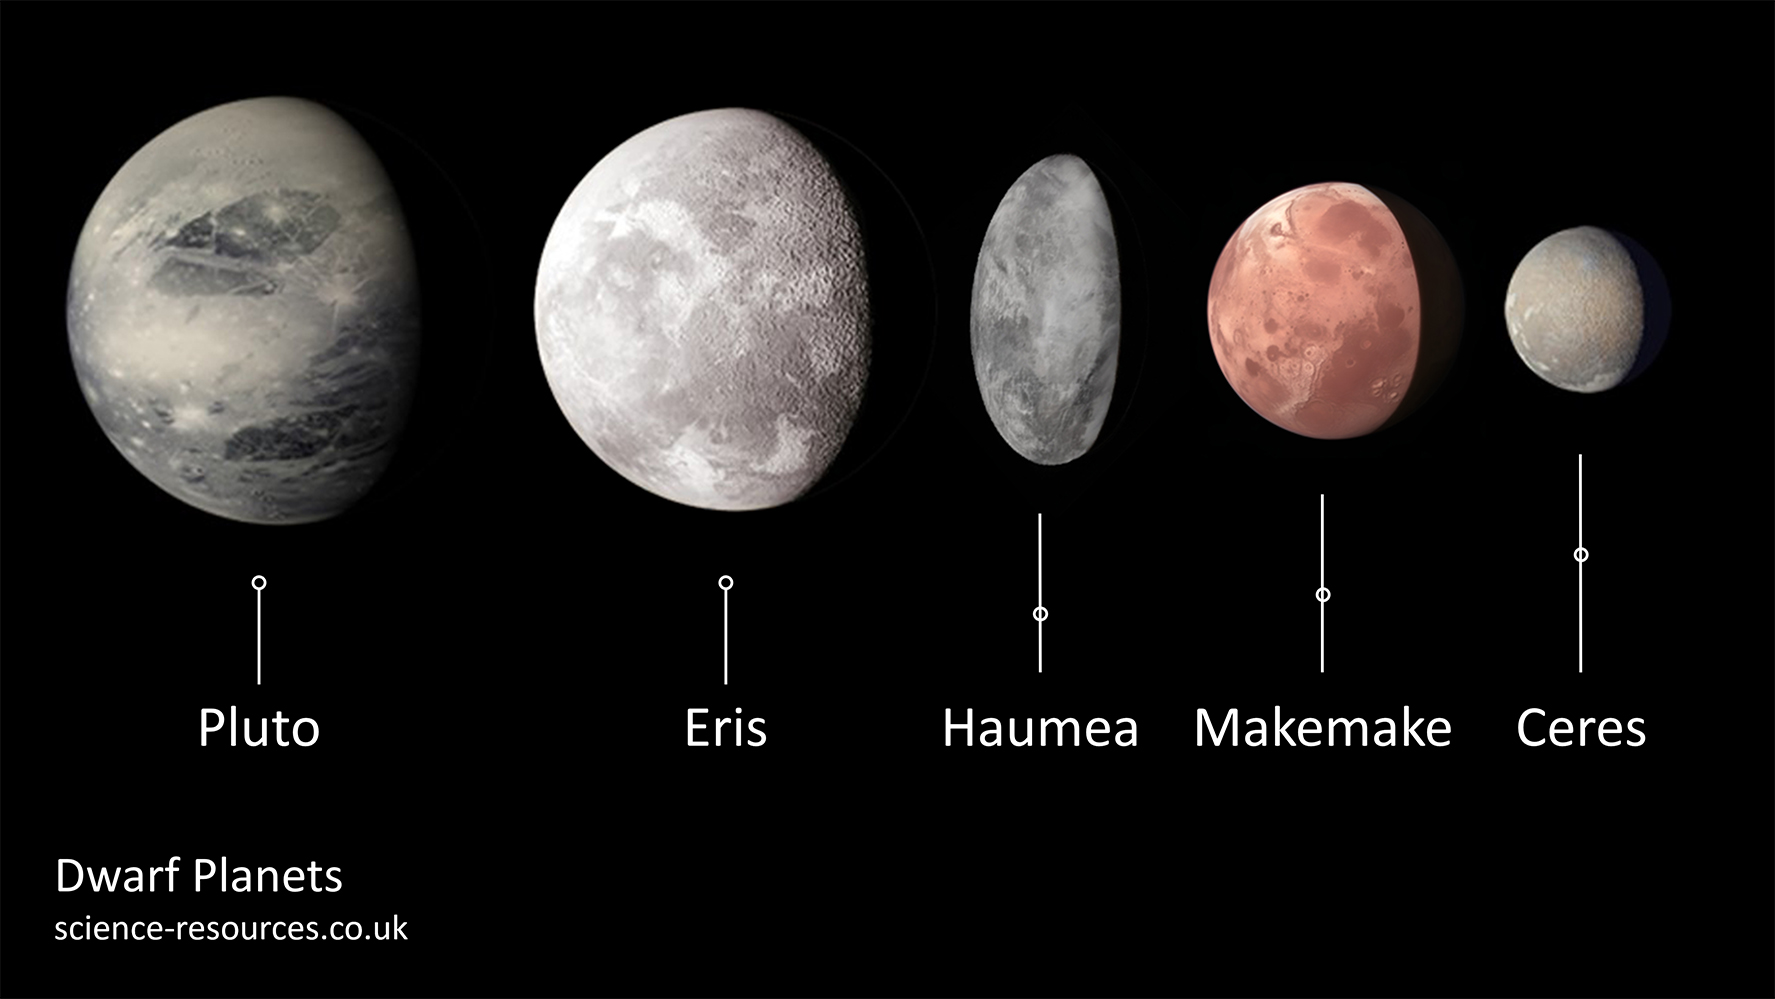 Image showing the dwarf planets in our solar system. From left to right: Pluto, Eris, Haumea, Makemake and Ceres.